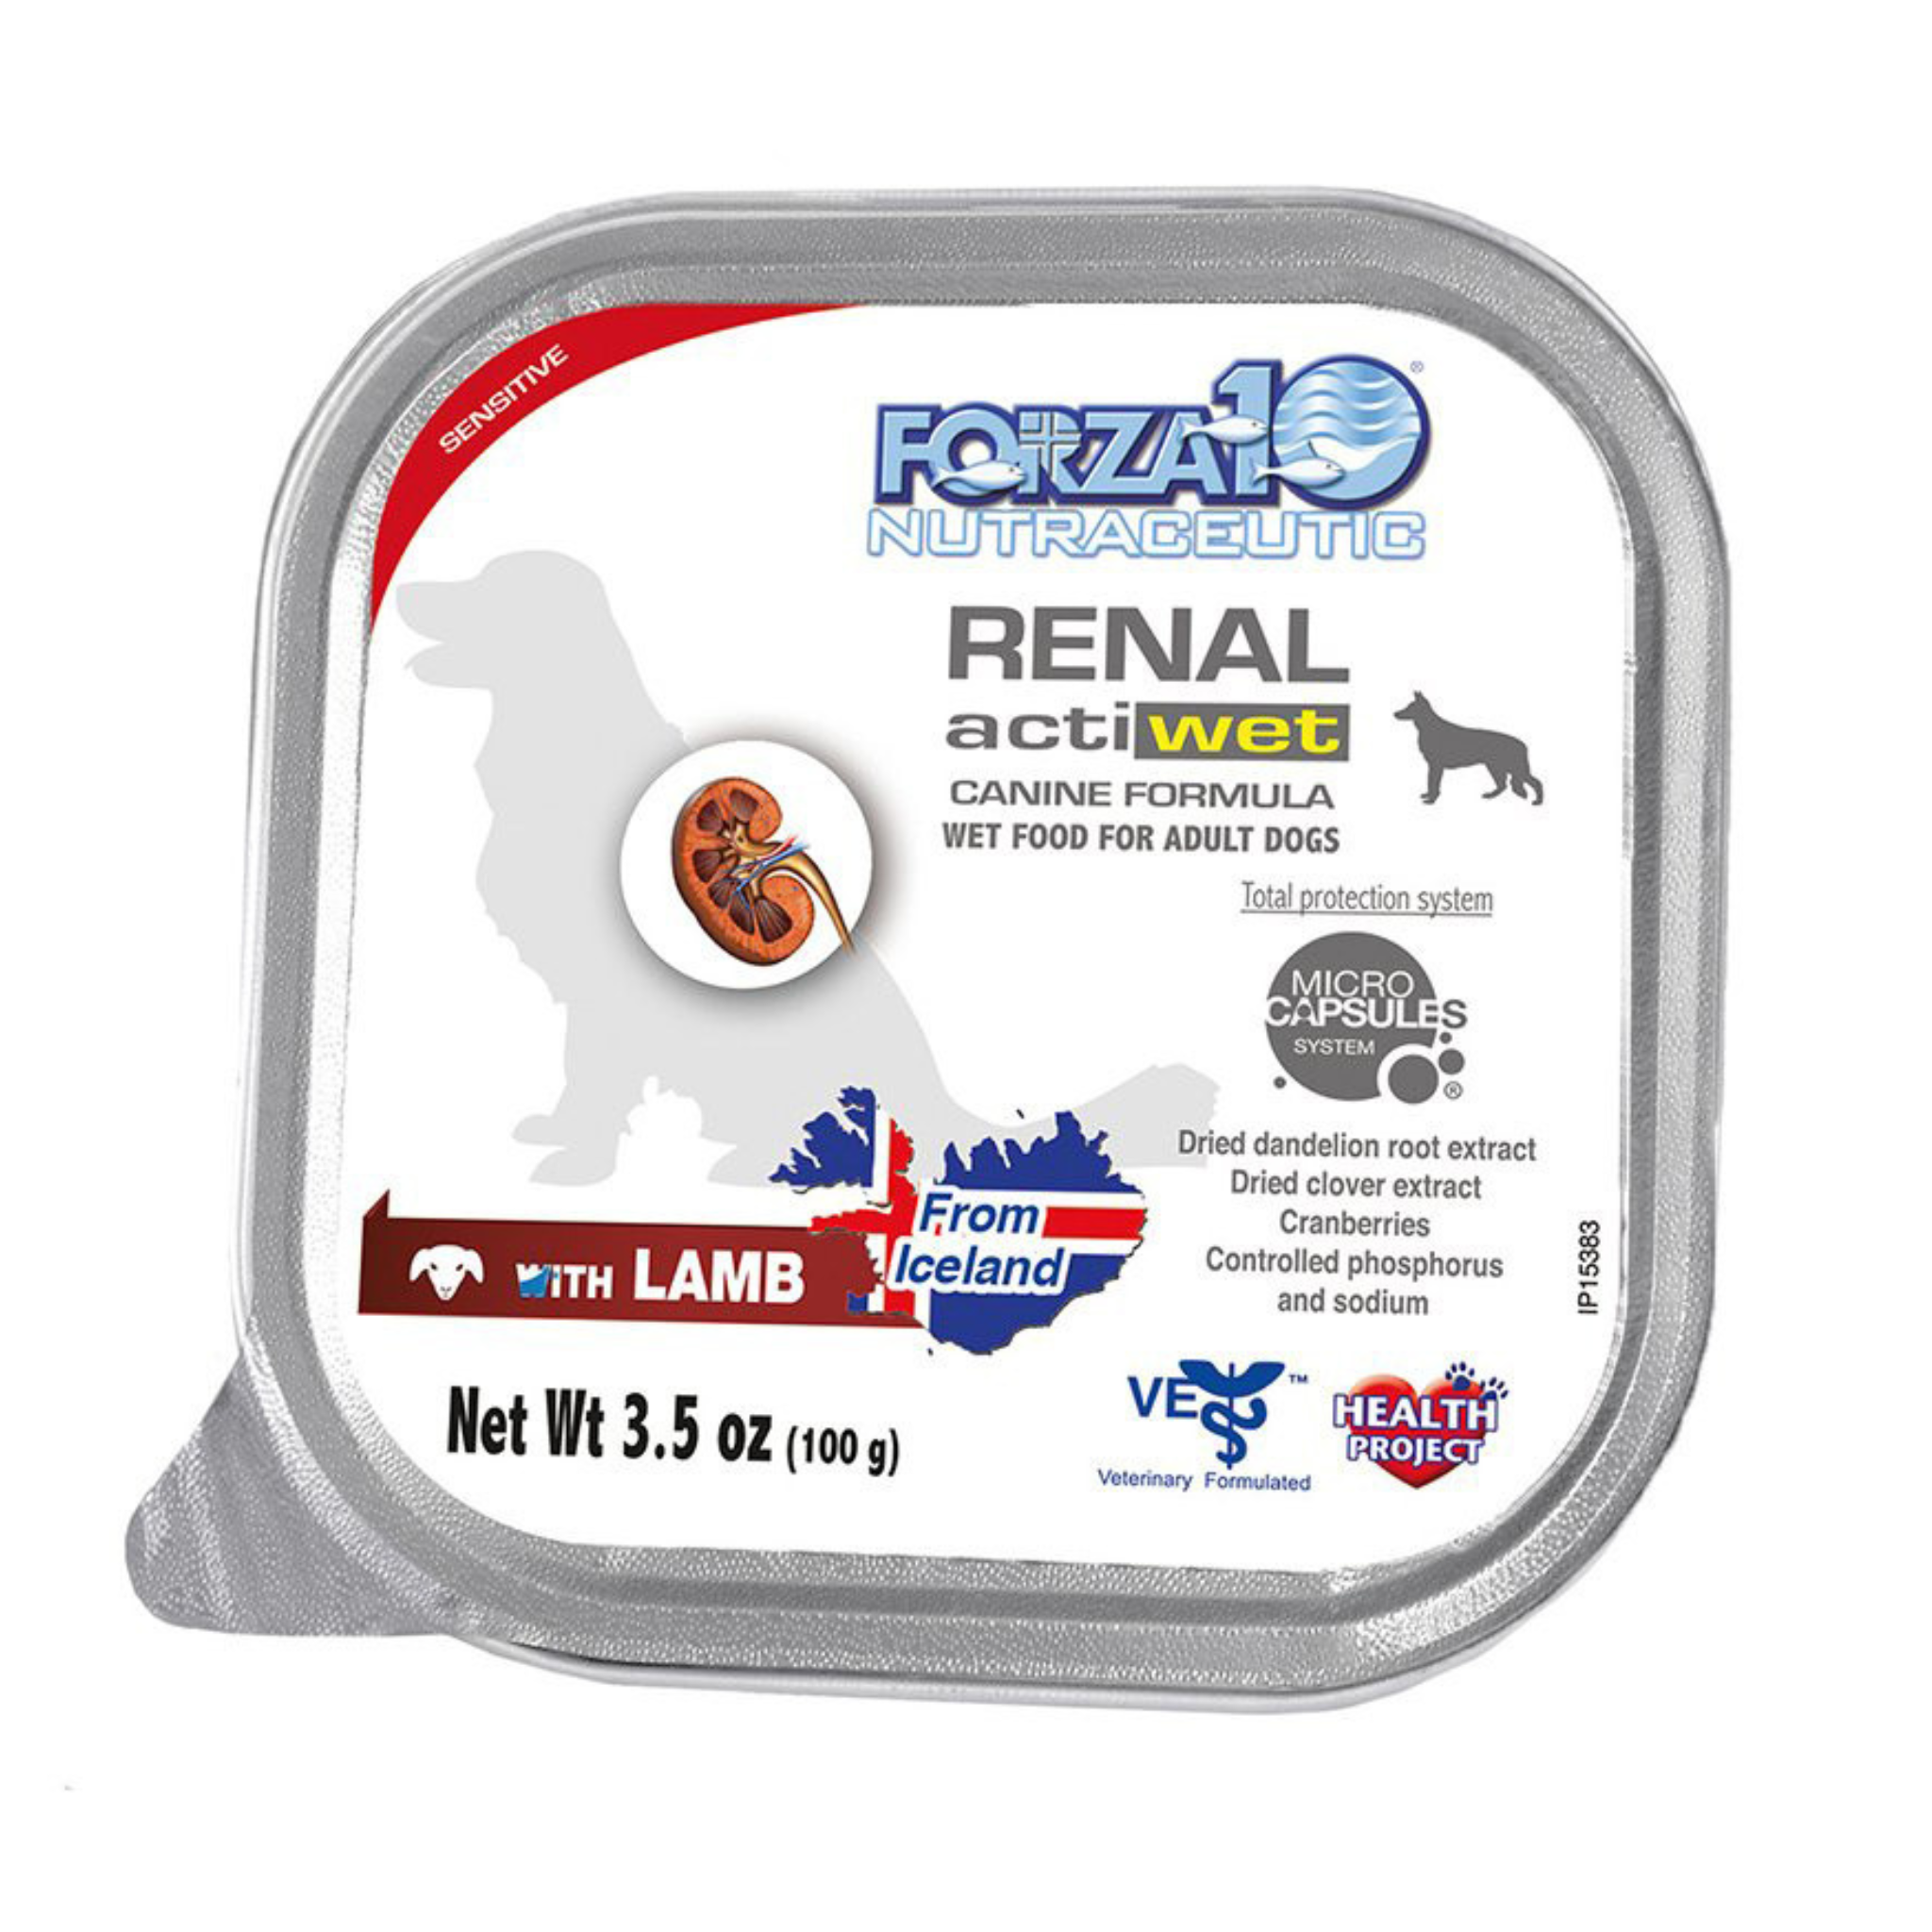 Forza10 Nutraceutic Actiwet Renal Support Wet Dog Food 3.5 oz - Mutts & Co.